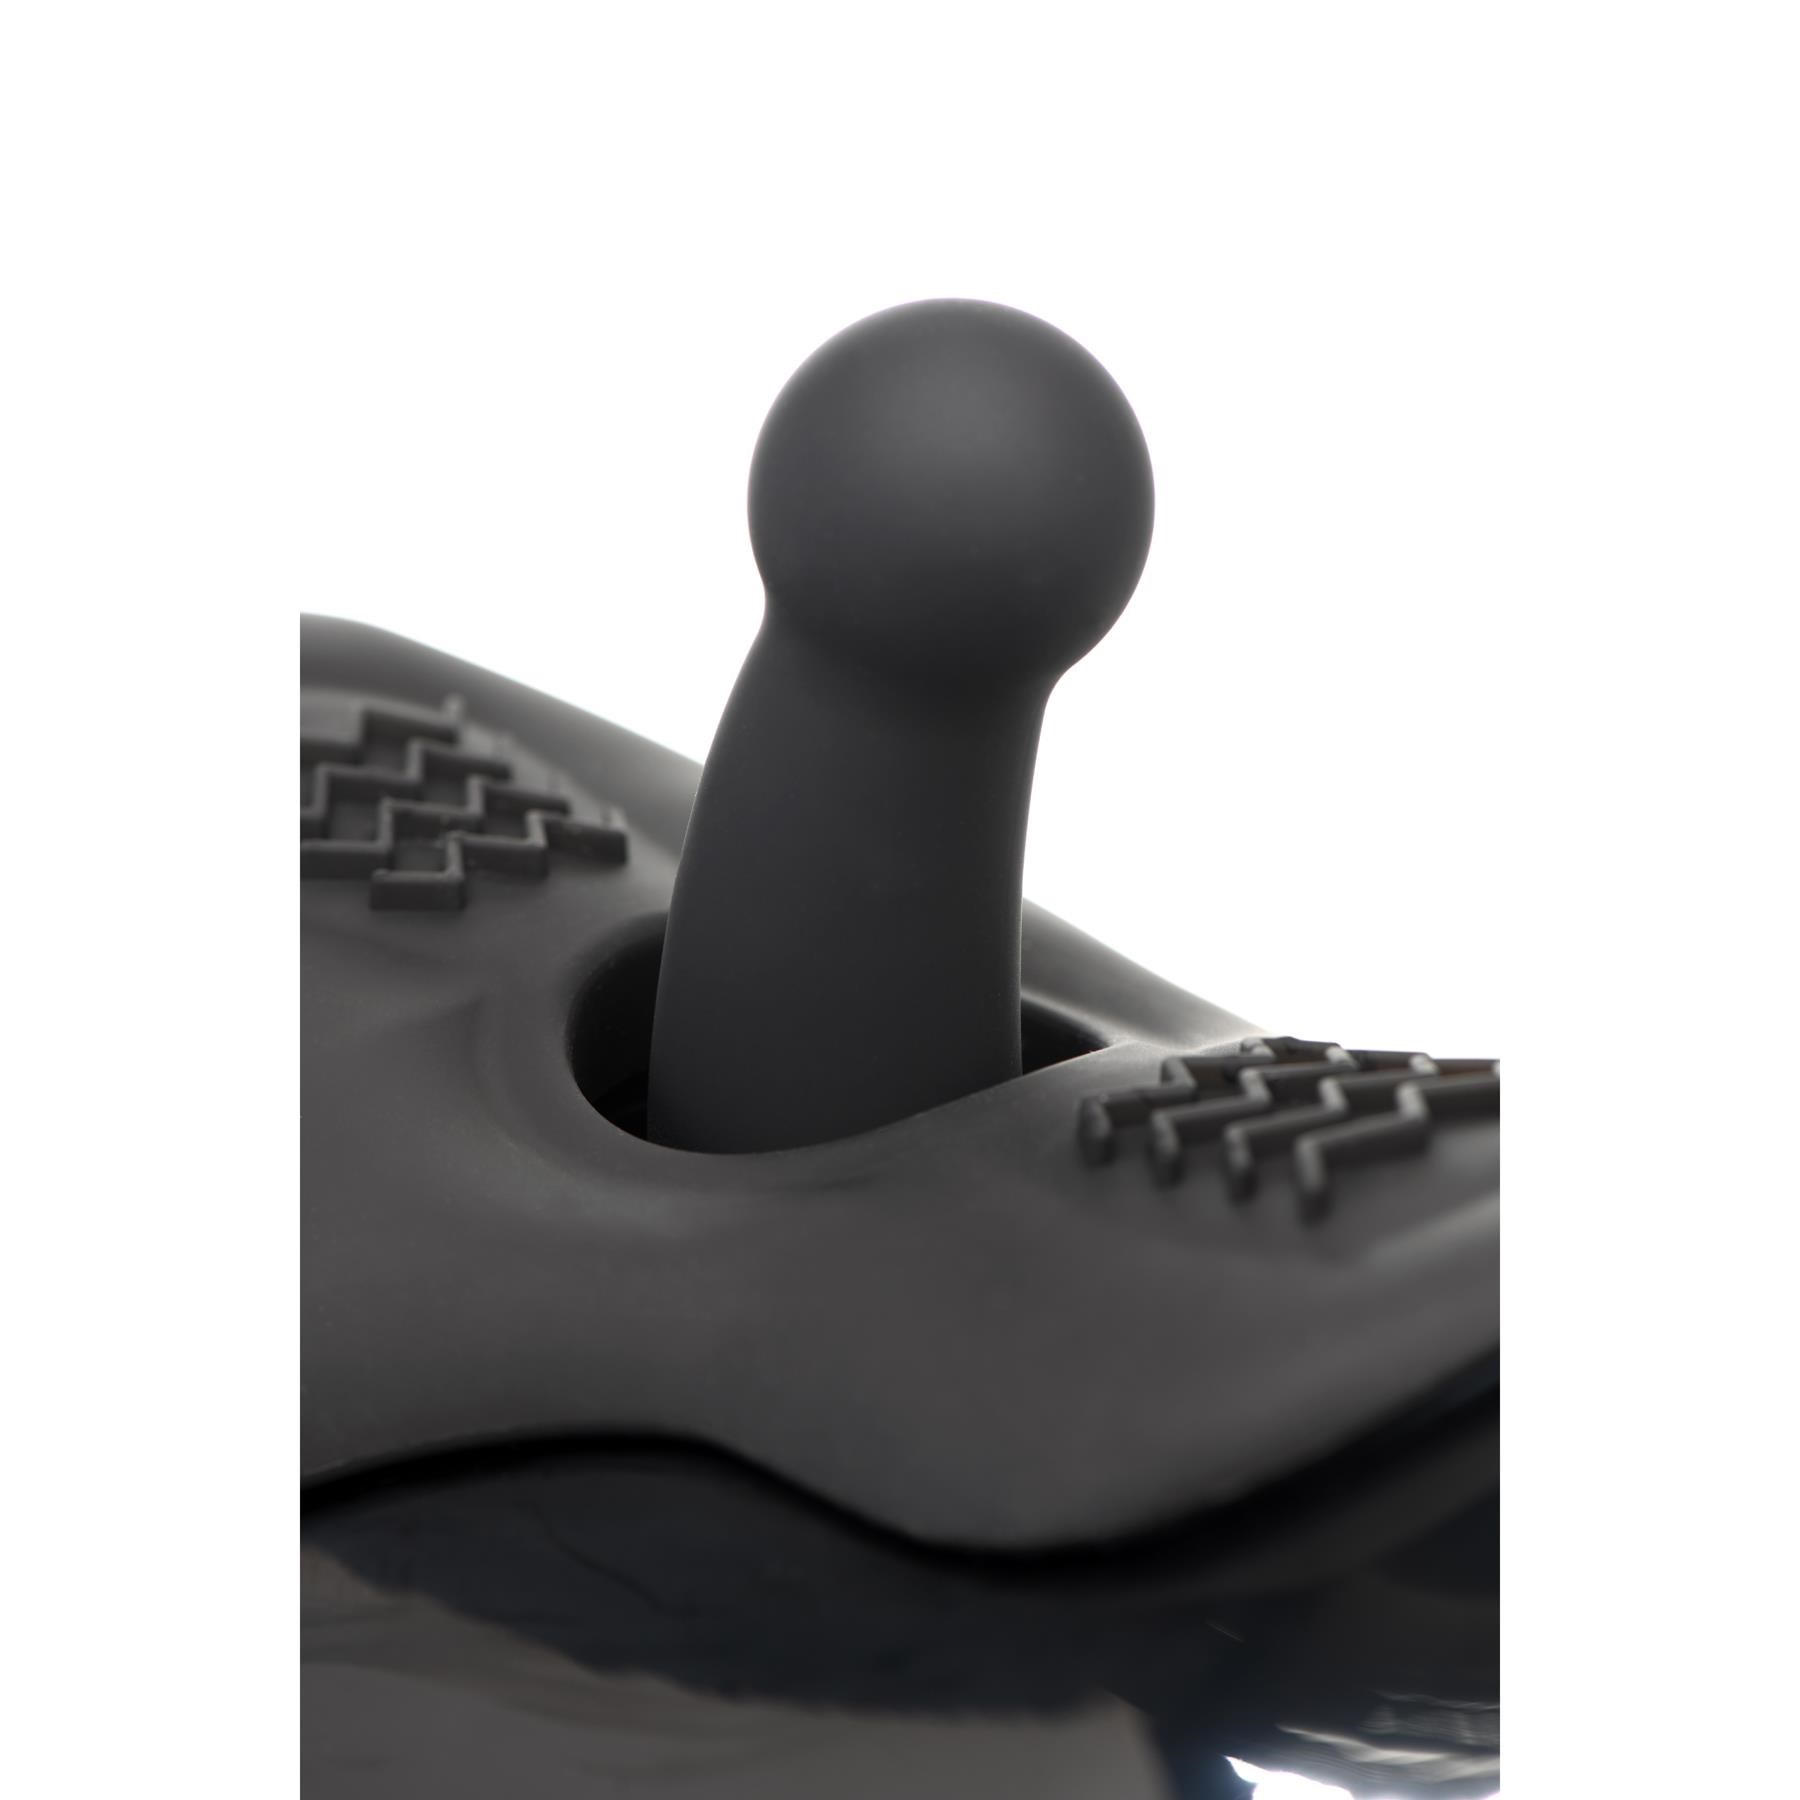 The Bucking Saddle Thrusting and Vibrating Sex Machine - Round Head Attachment